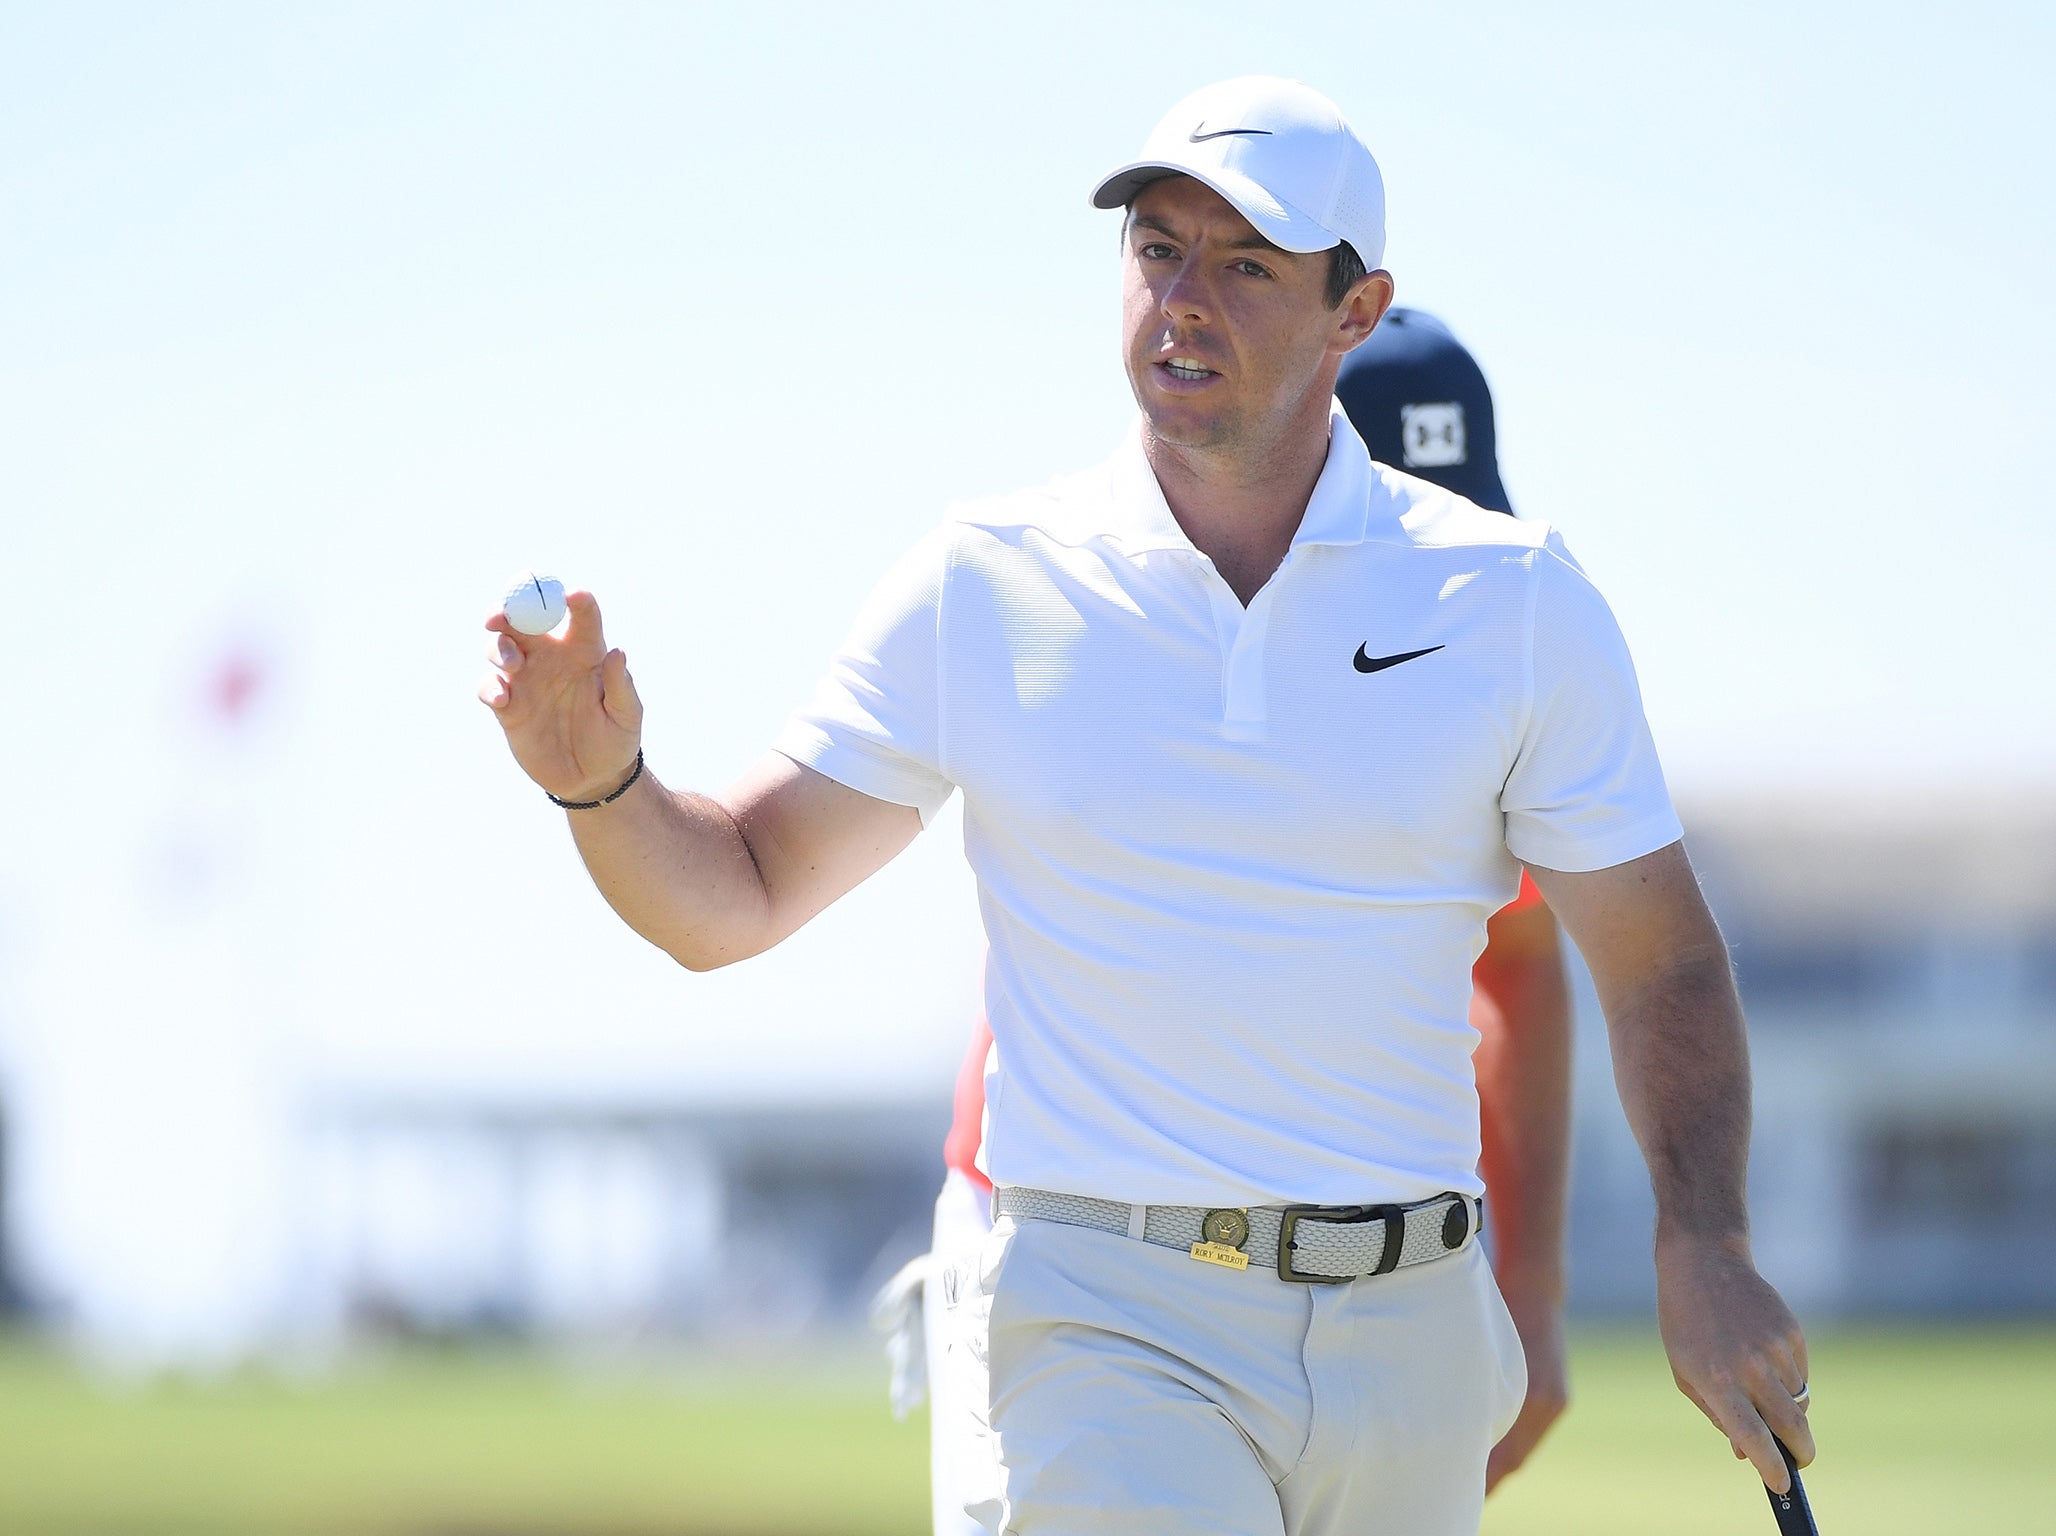 Rory McIlroy is currently playing The Open